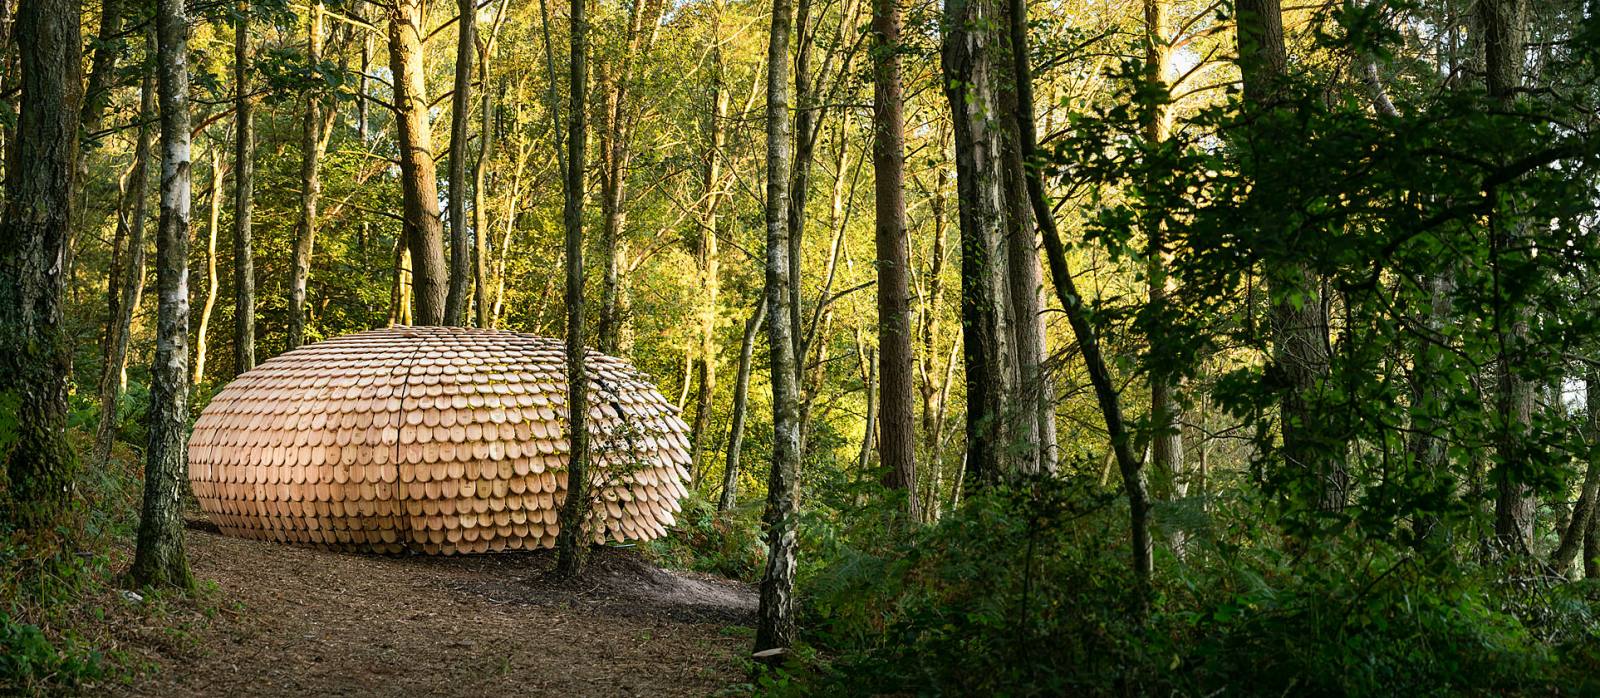 Sculptural installation in forest setting